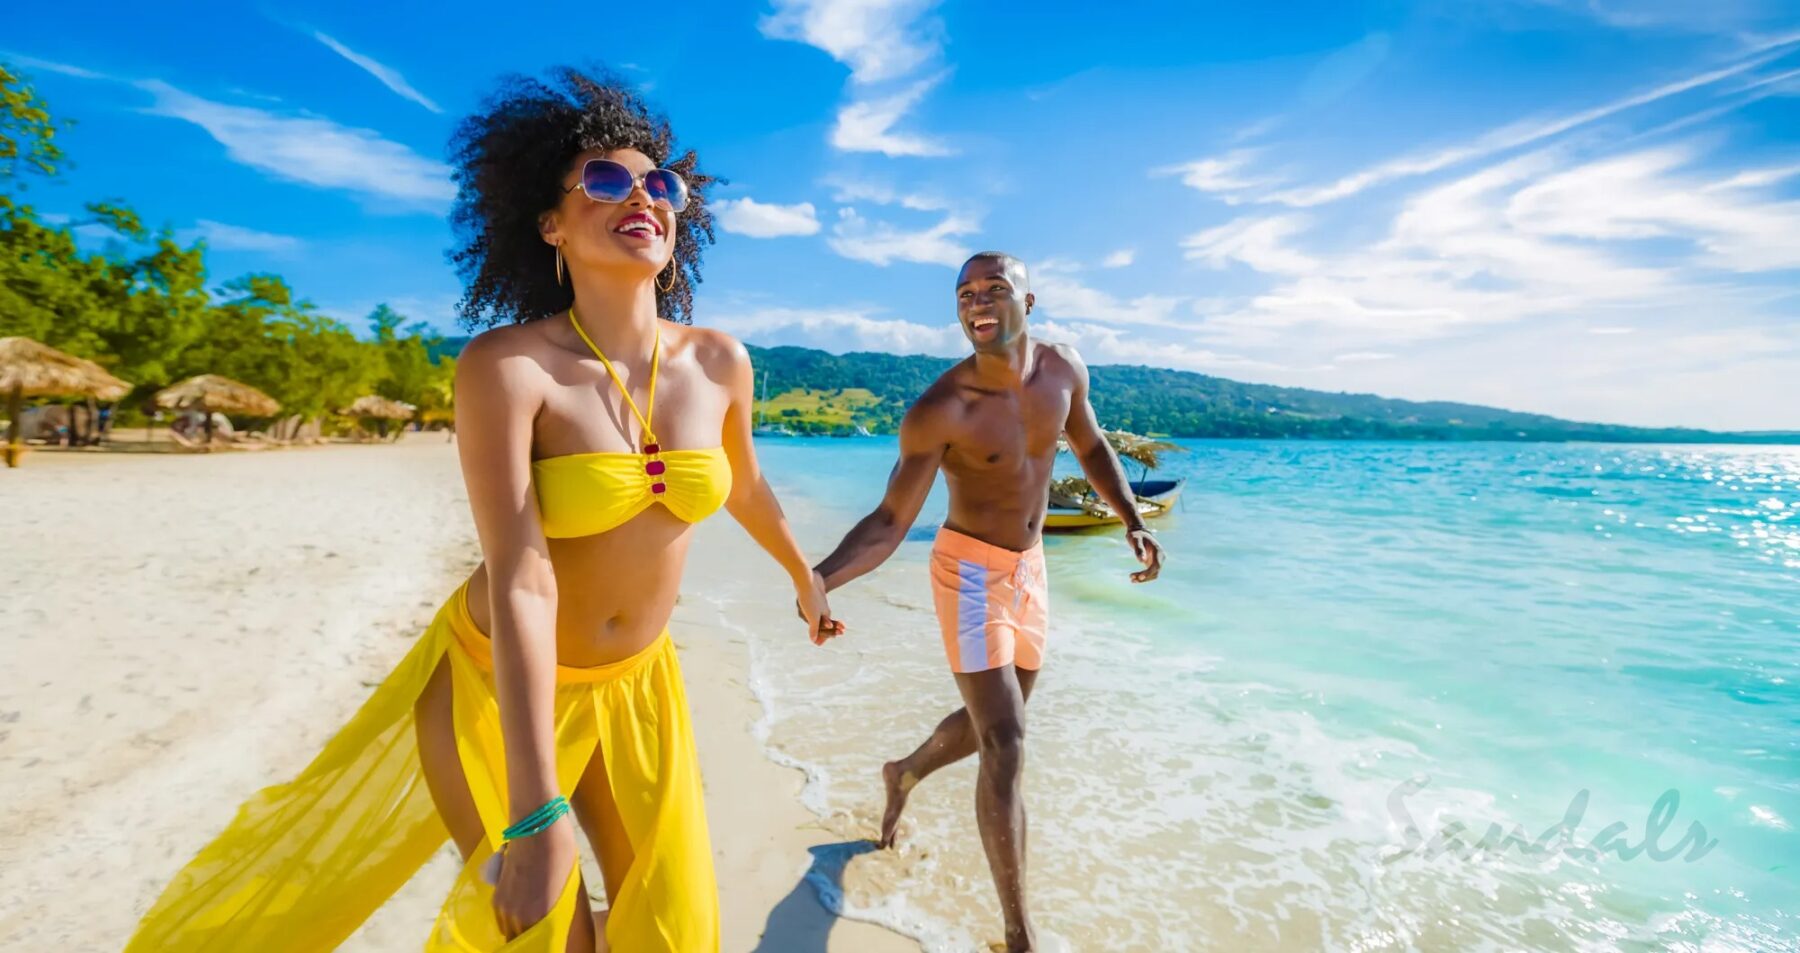 Cruise or All-Inclusive Resort: Which is Best for Your Honeymoon?